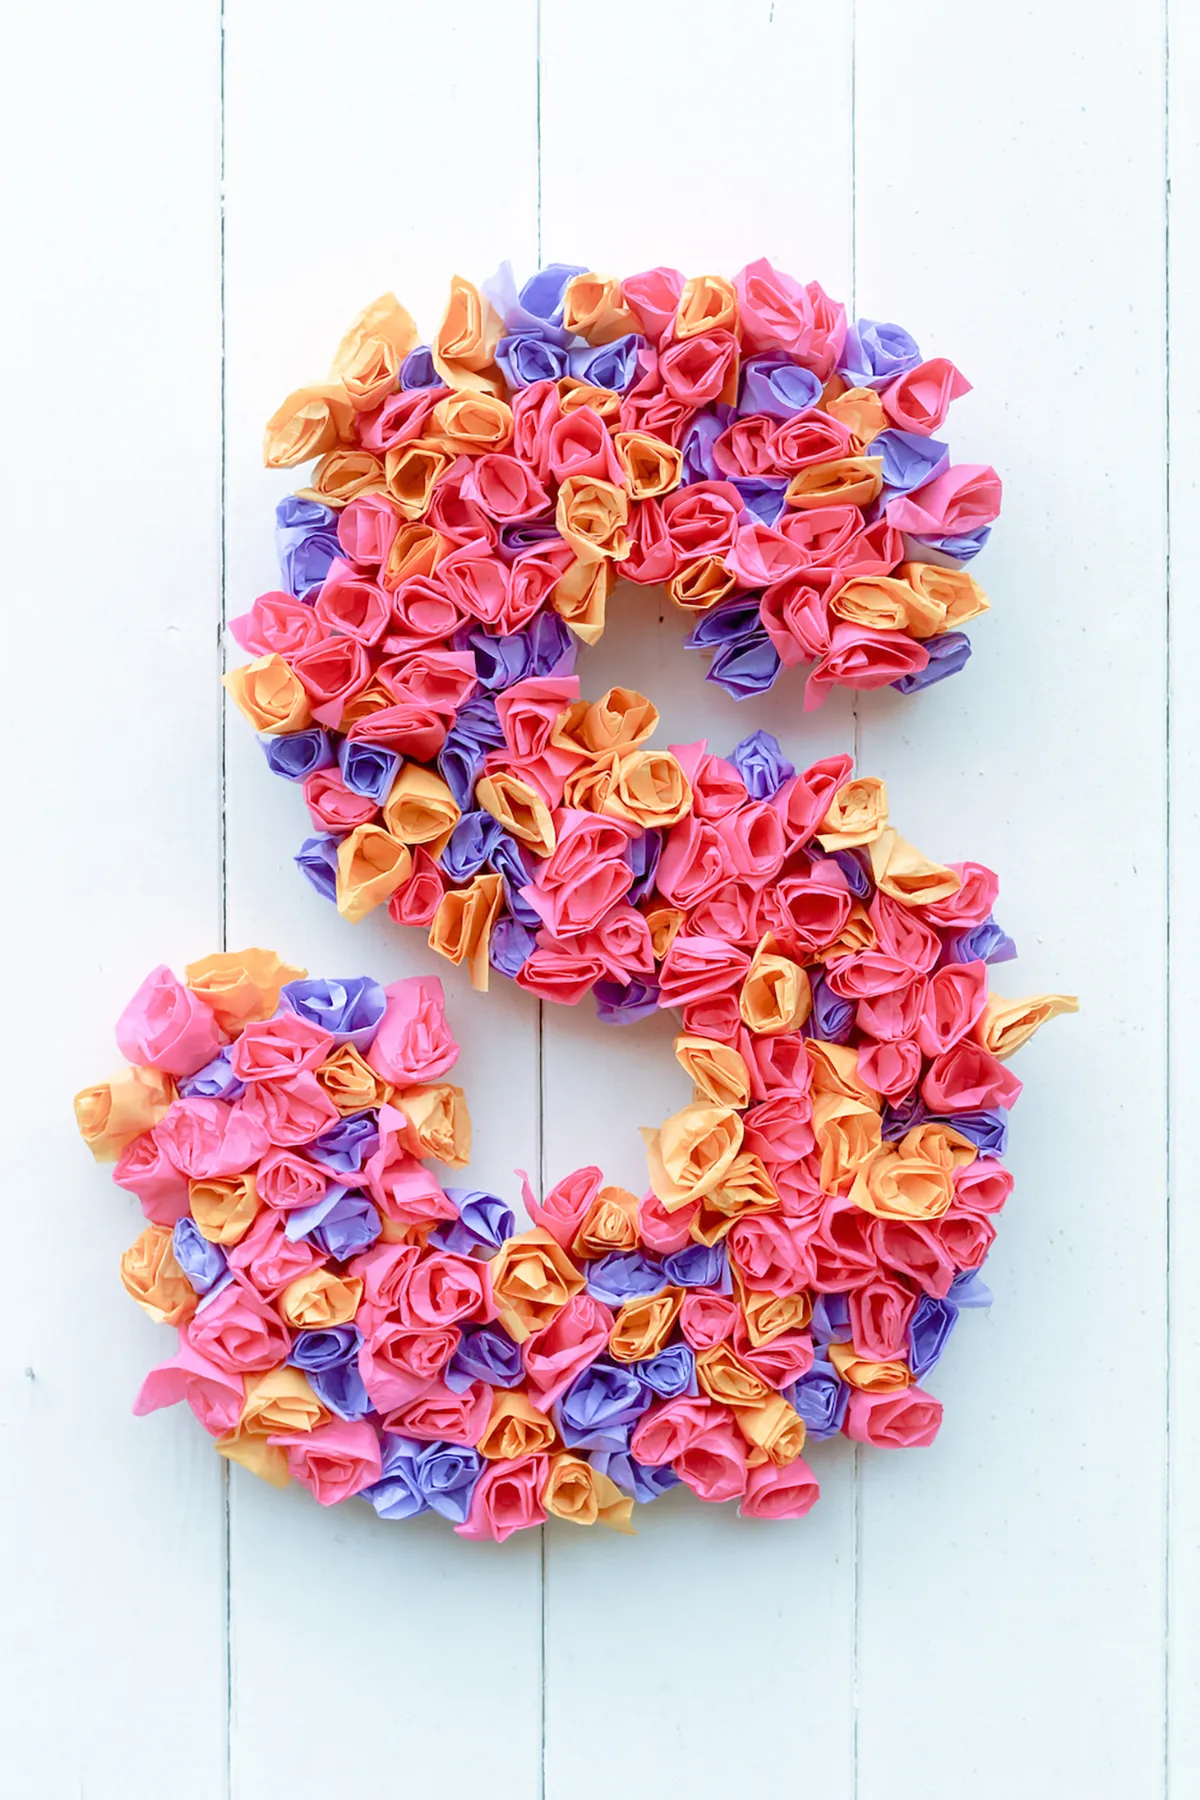 diy valentines decorations - rosette in the shape of a letter s